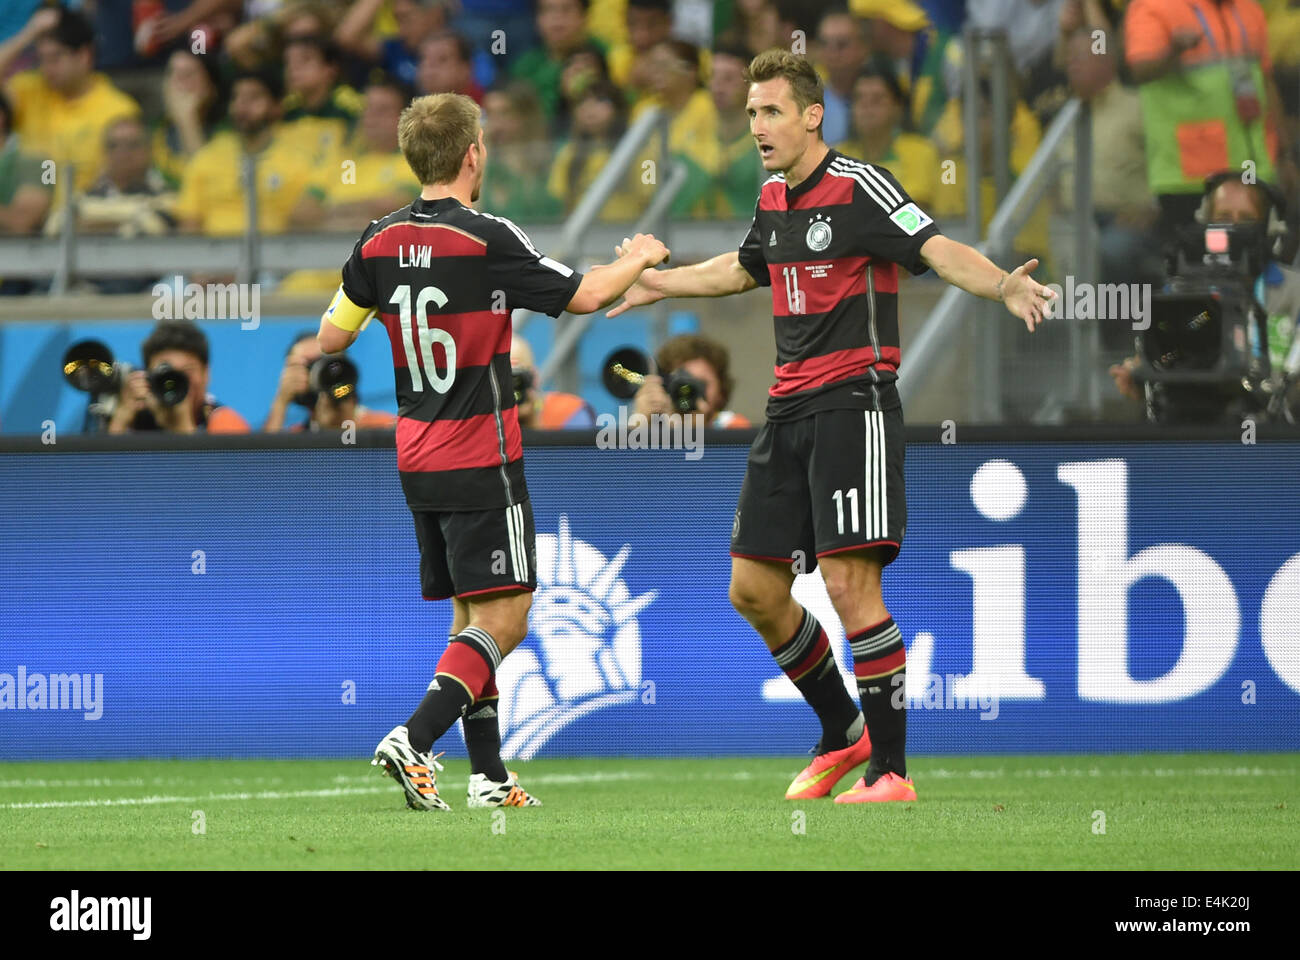 Belo Horizonte, Brazil. 8th July, 2014. (L-R) Philipp Lahm, Miroslav Klose (GER) Football/Soccer : Miroslav Klose of Germany celebrates with his teammate Philipp Lahm after scoring their second goal during the FIFA World Cup Brazil 2014 Semi-finals match between Brazil 1-7 Germany at Estadio Mineirao in Belo Horizonte, Brazil . © SONG Seak-In/AFLO/Alamy Live News Stock Photo